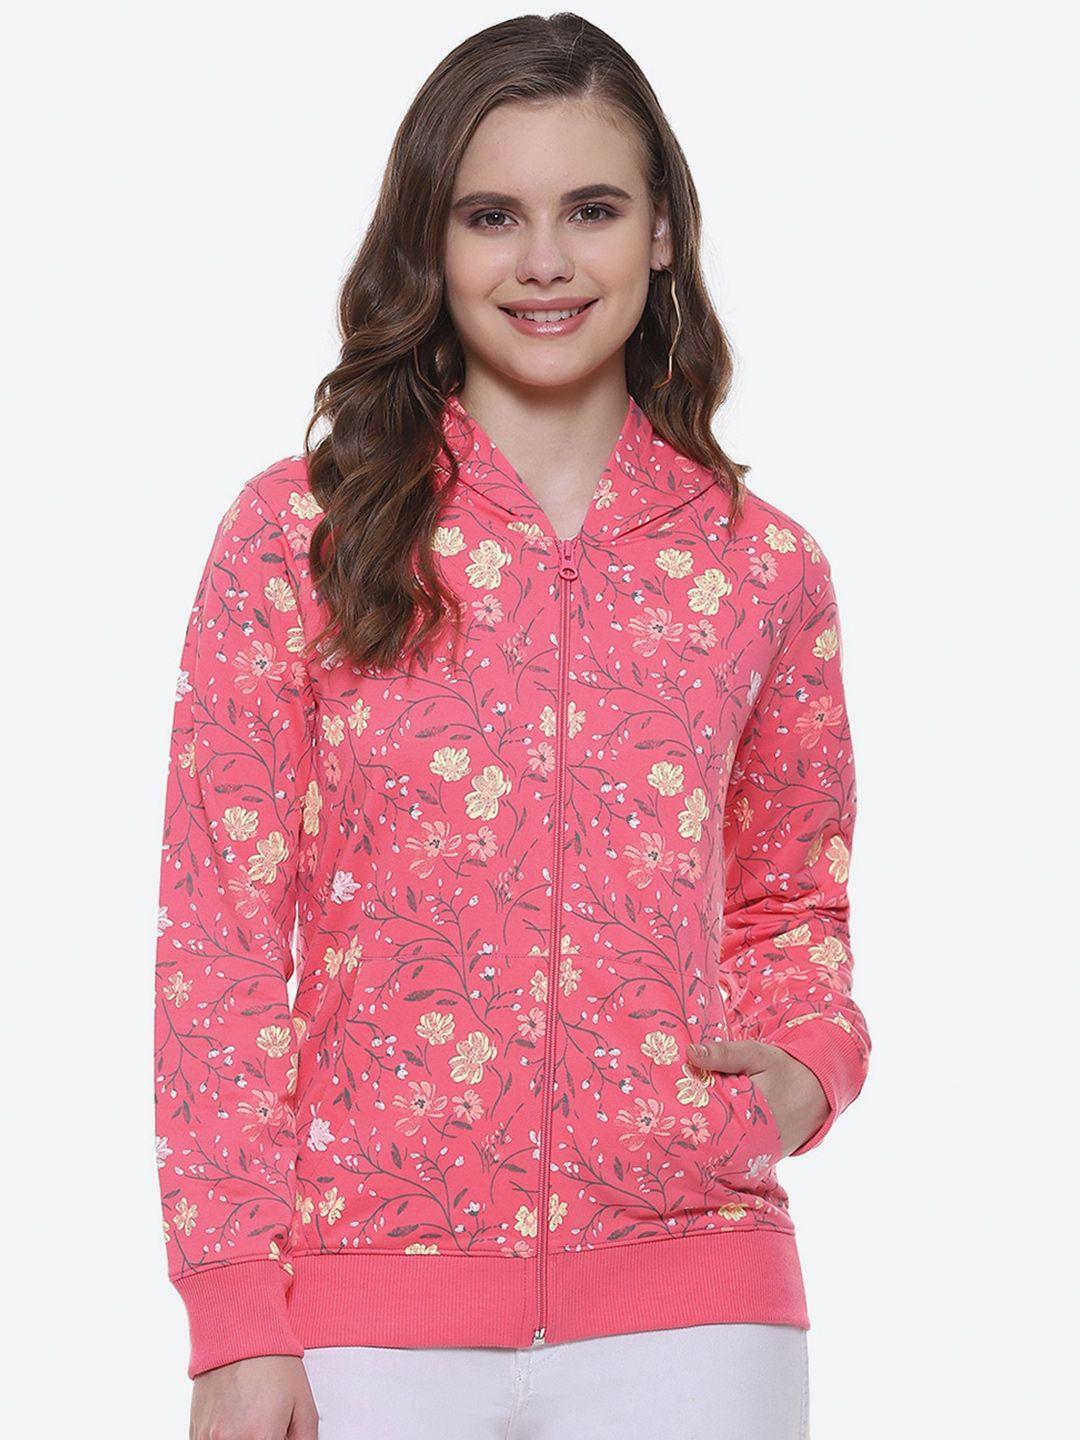 2bme-floral-printed-cotton-hooded-front-open-sweatshirt